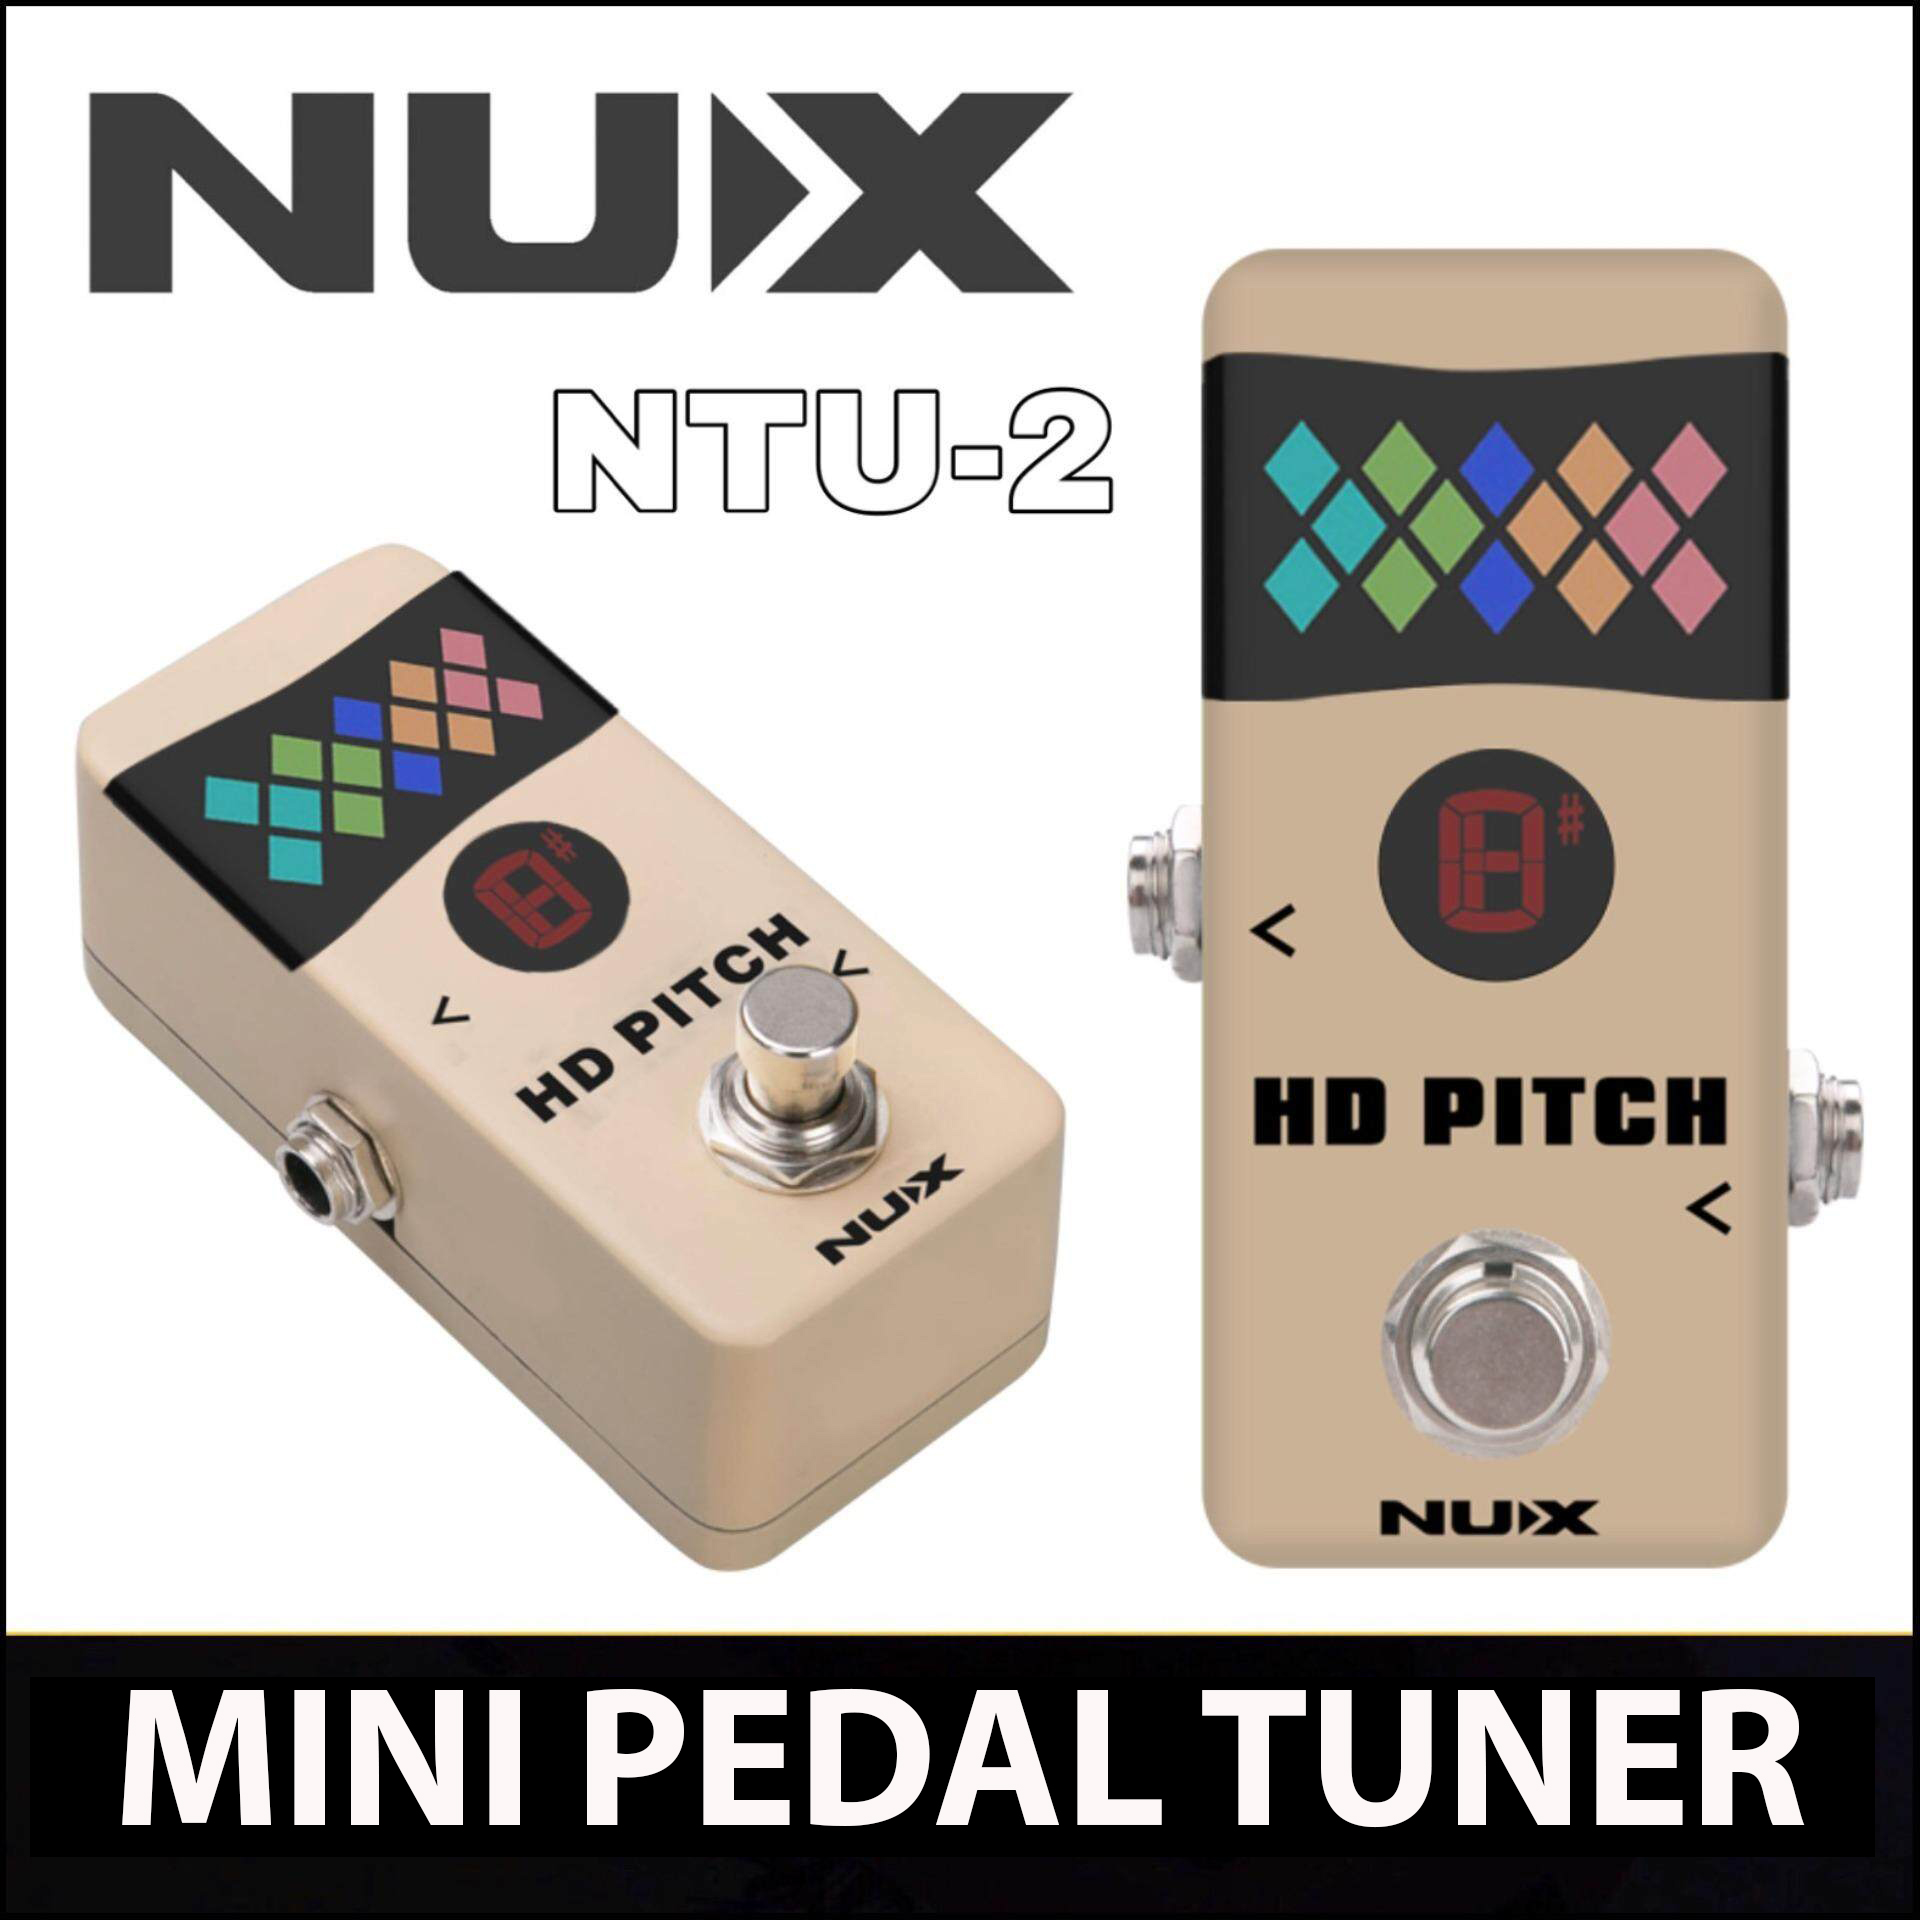 NUX HD Pitch Guitar Pedal Tuner | Mini Pedal Tuner | 2 Tuning modes | 2 Display modes True Bypass